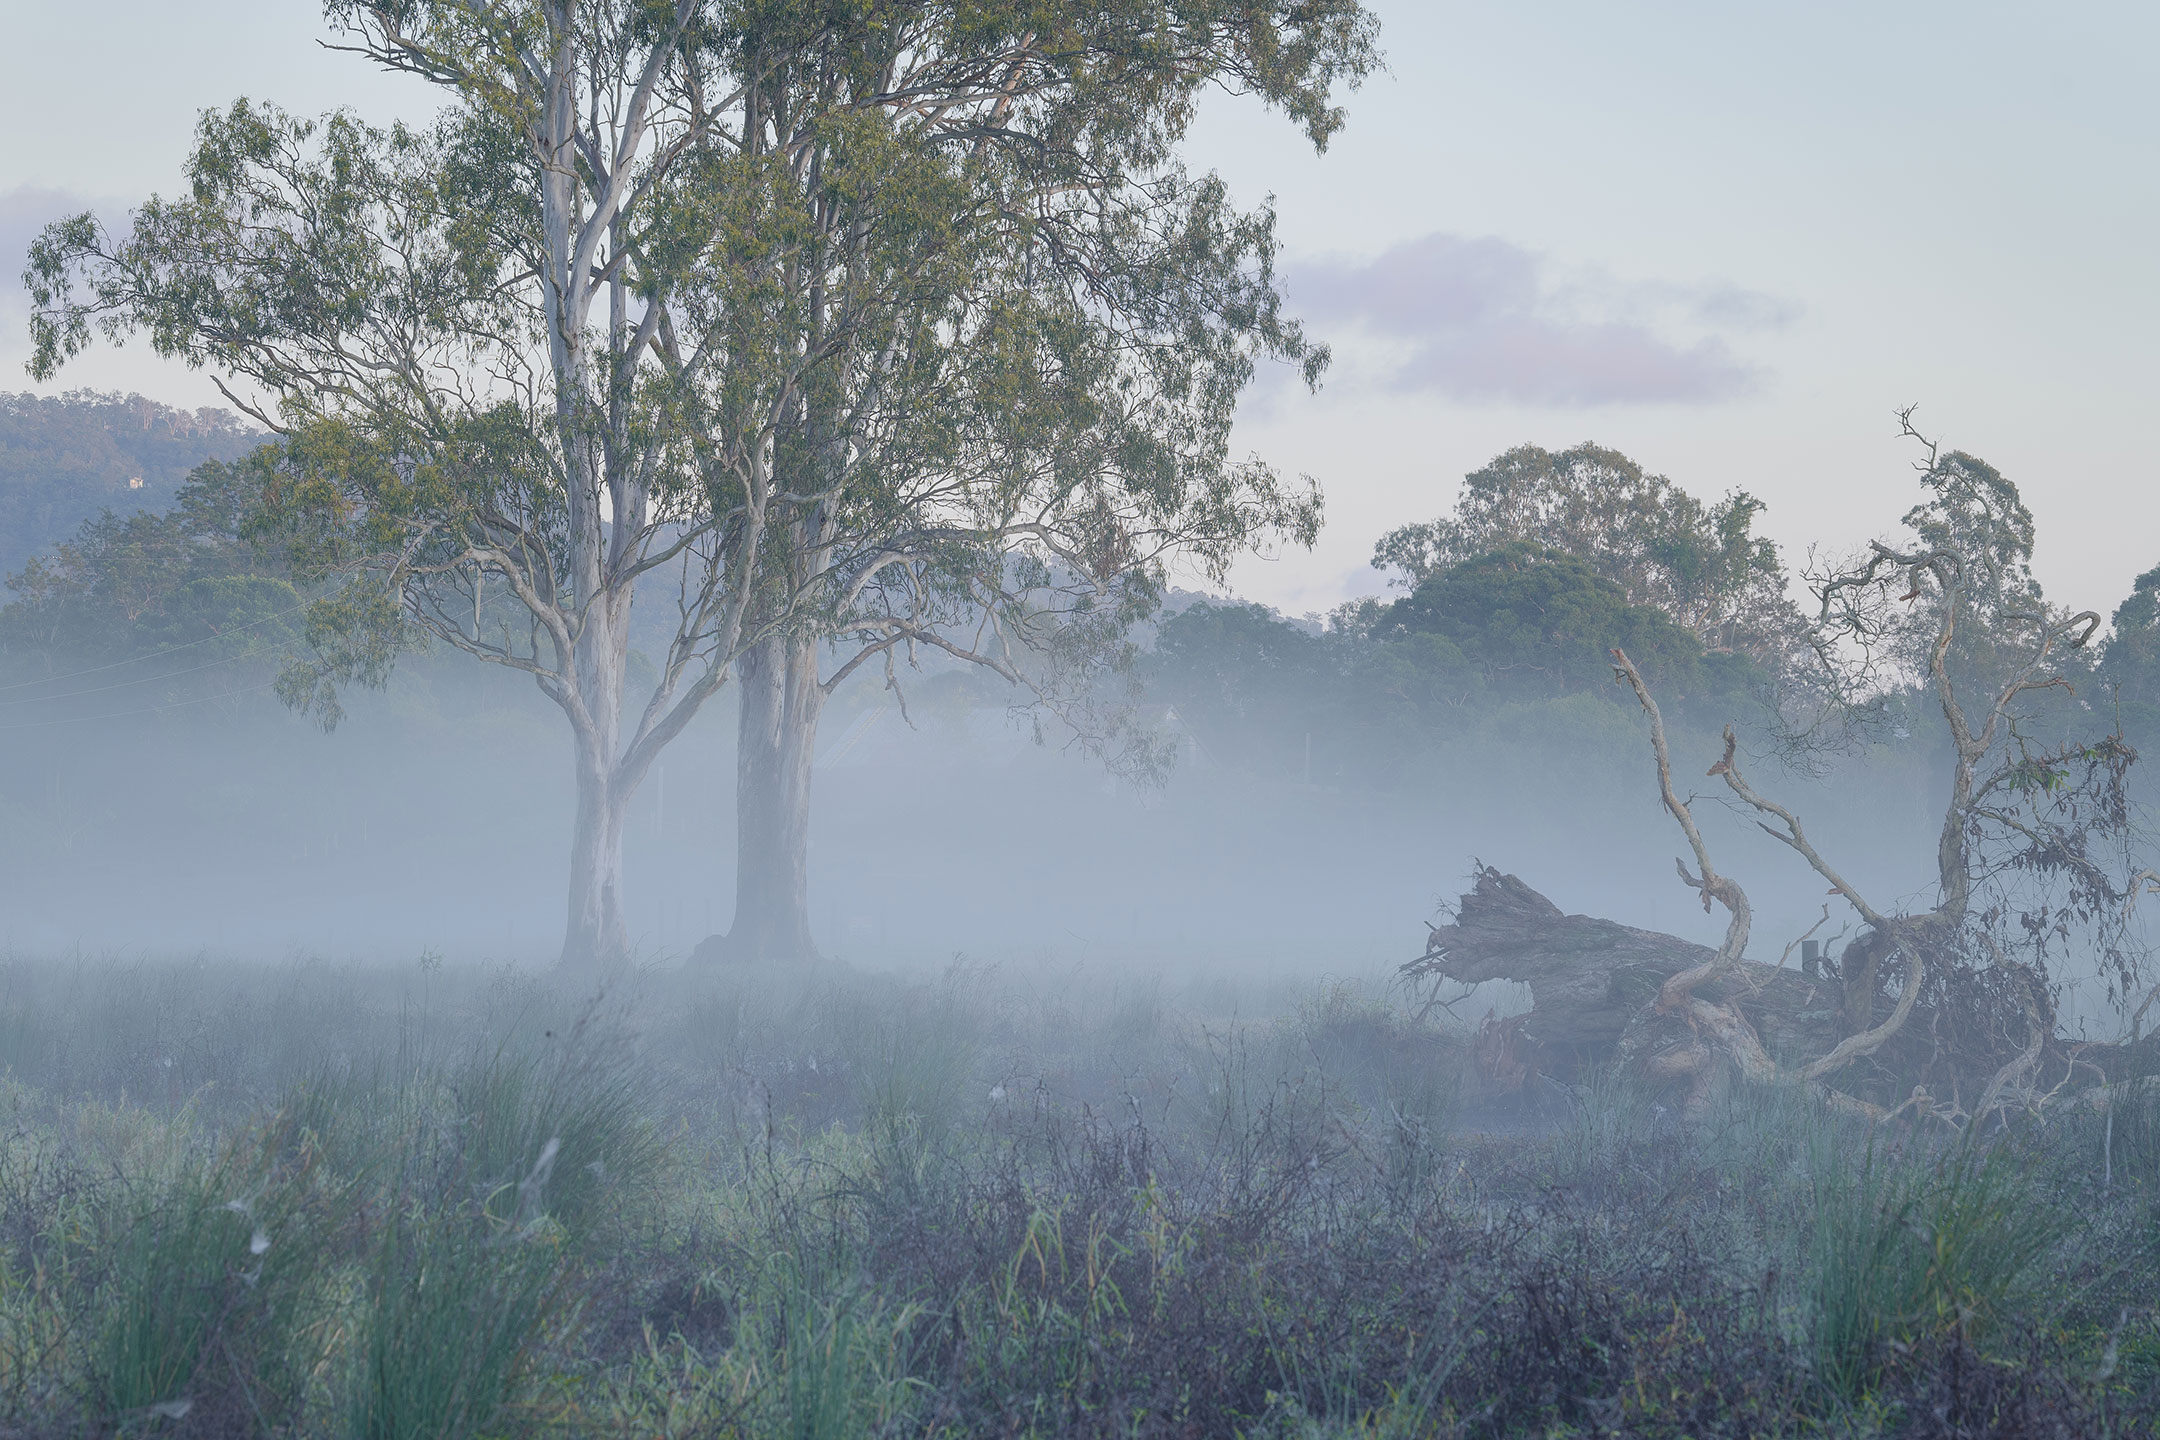 Two Eucalypts pay their respects to a fallen Paperbark on a misty morning in the Gold Coast Hinterland, Australia